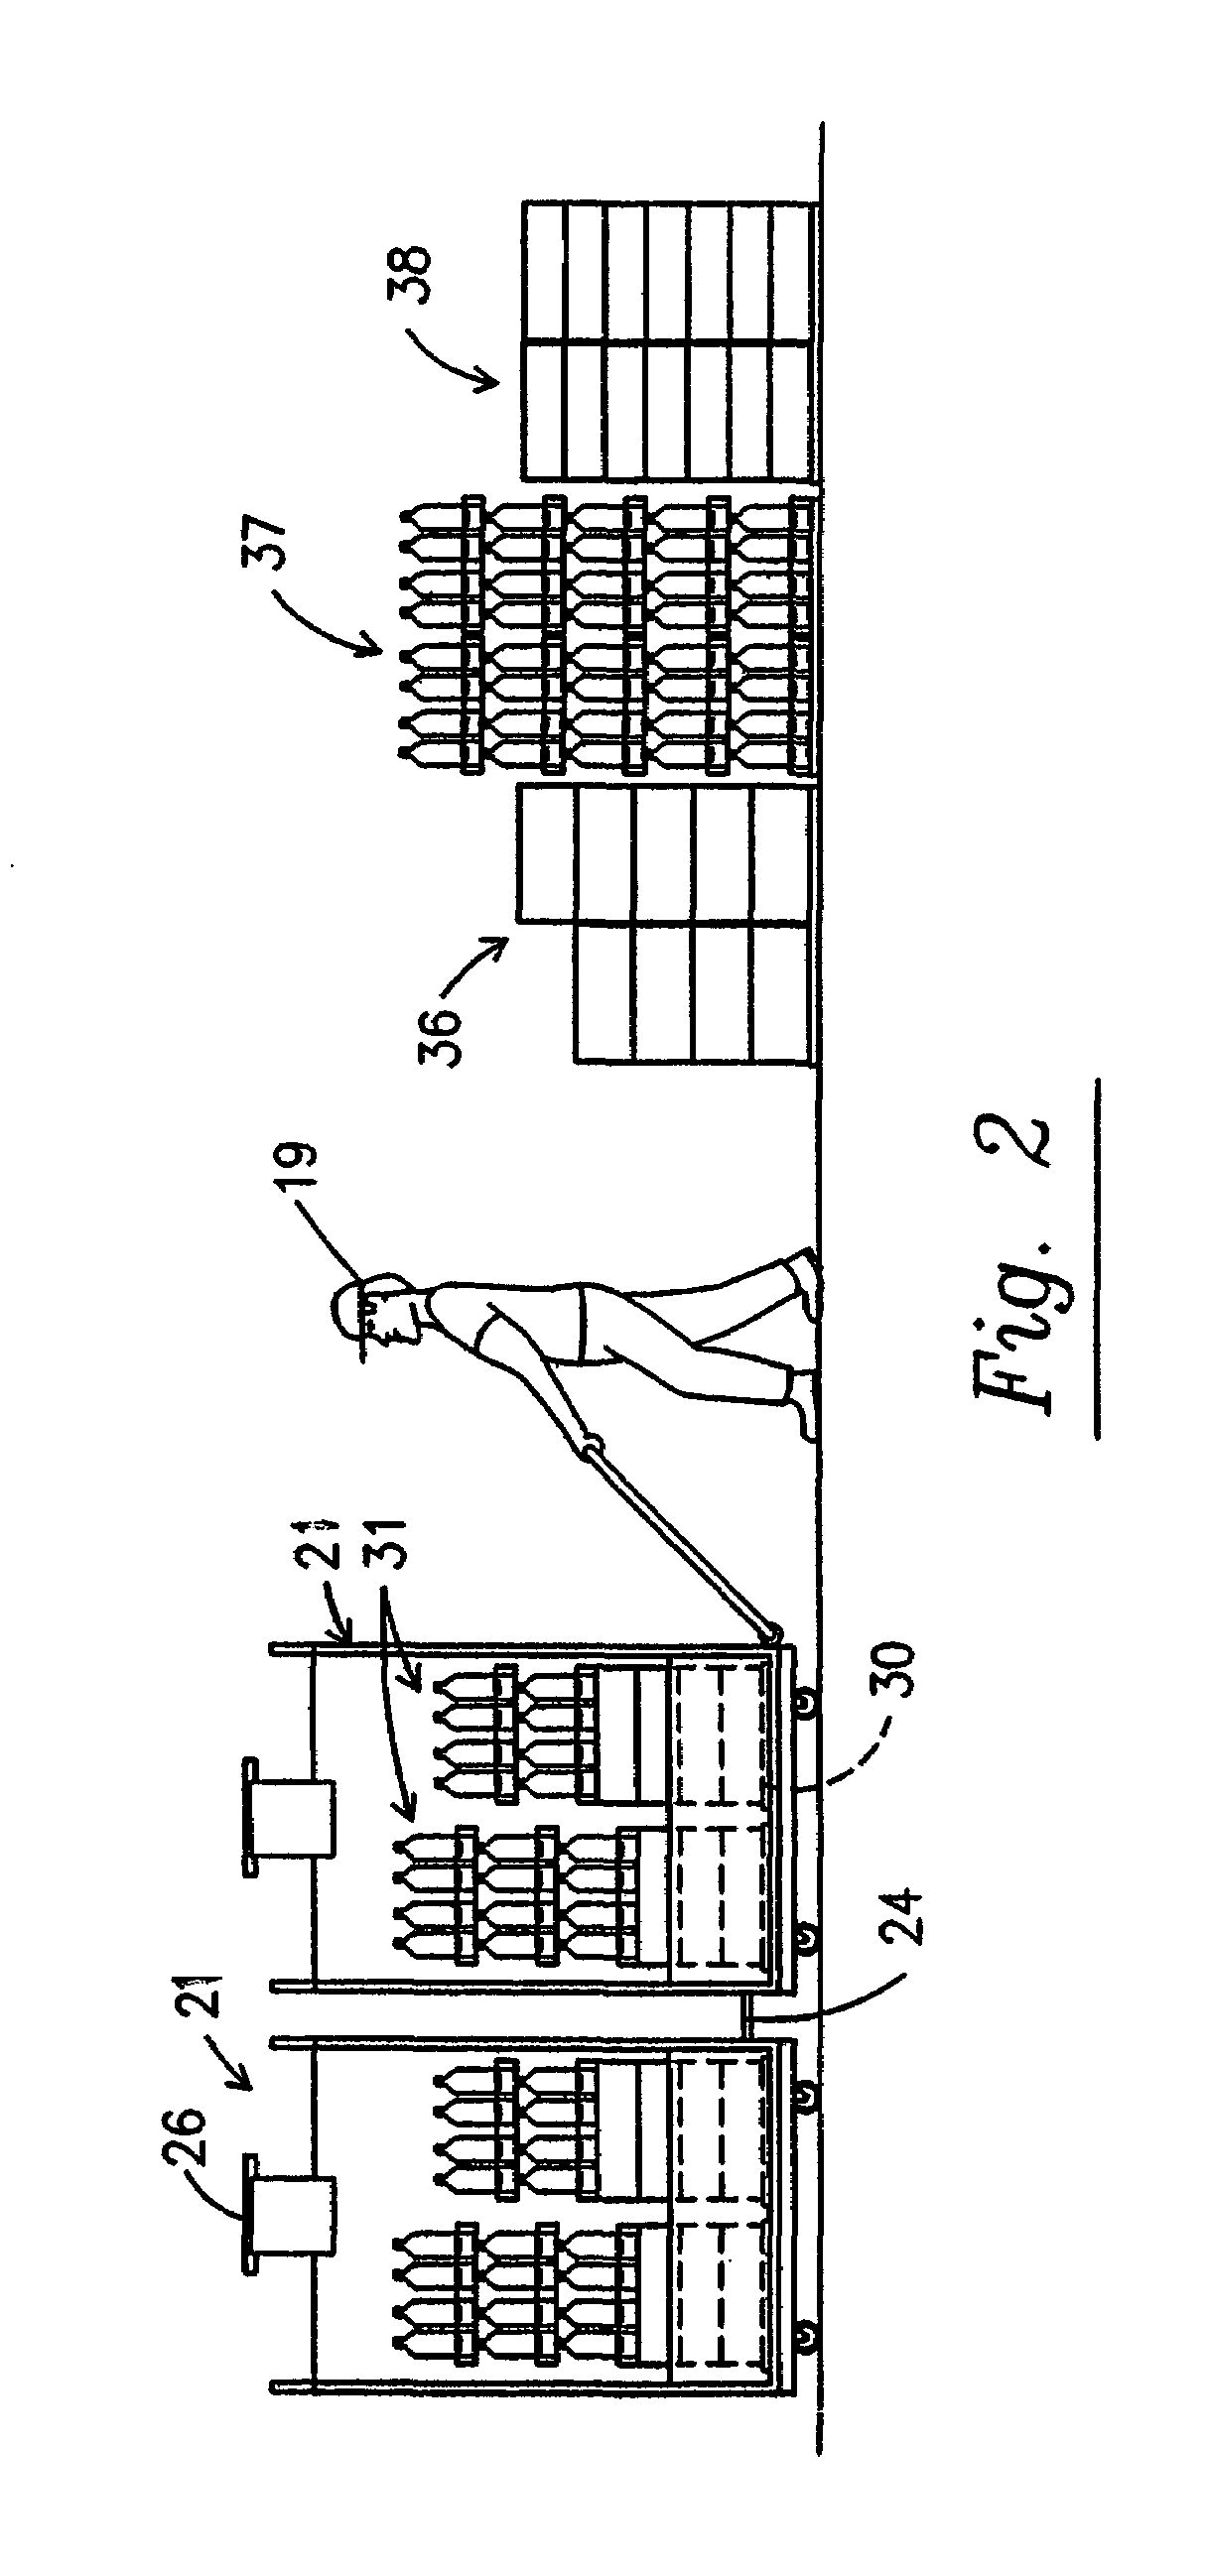 Transport carts configured to be locked to the sidewalls of a transportation vehicle for distributing product